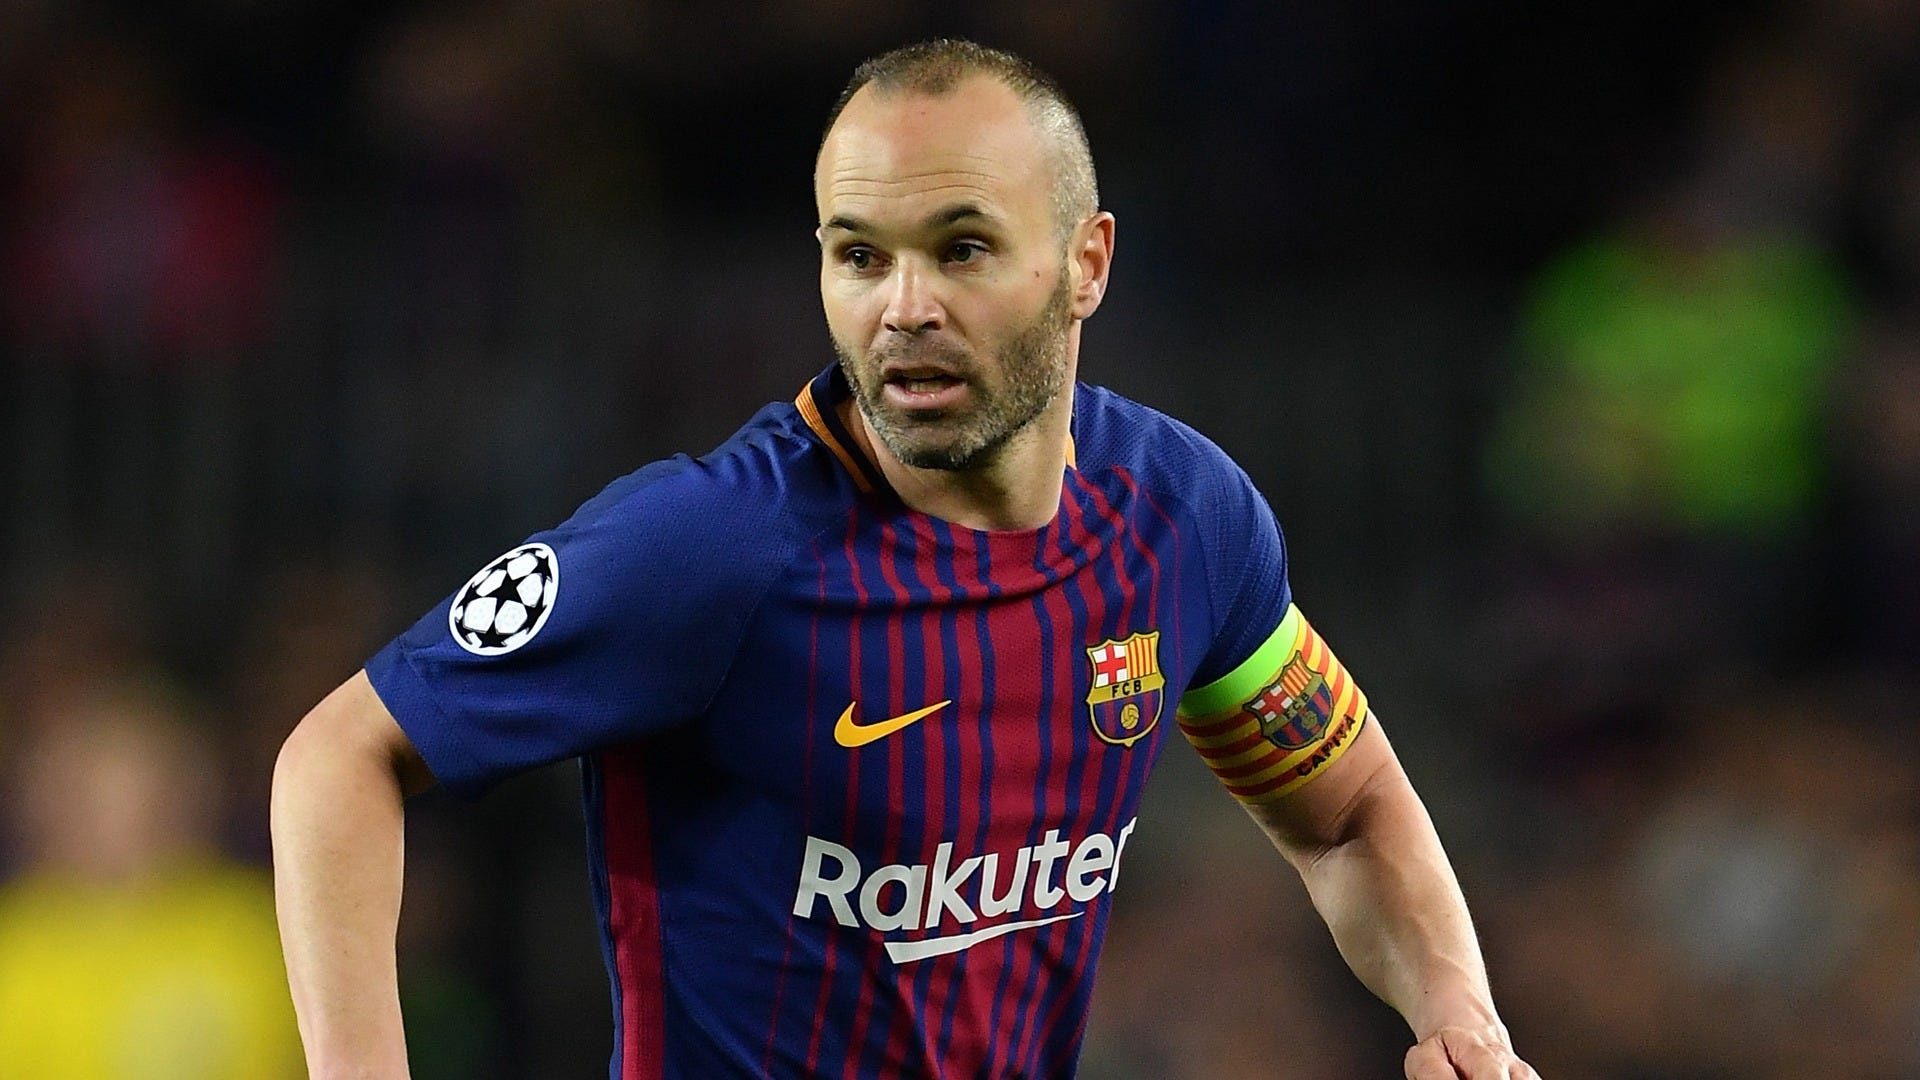 Andres Iniesta: The story of how Barcelona signed one of the greats | Goal.com